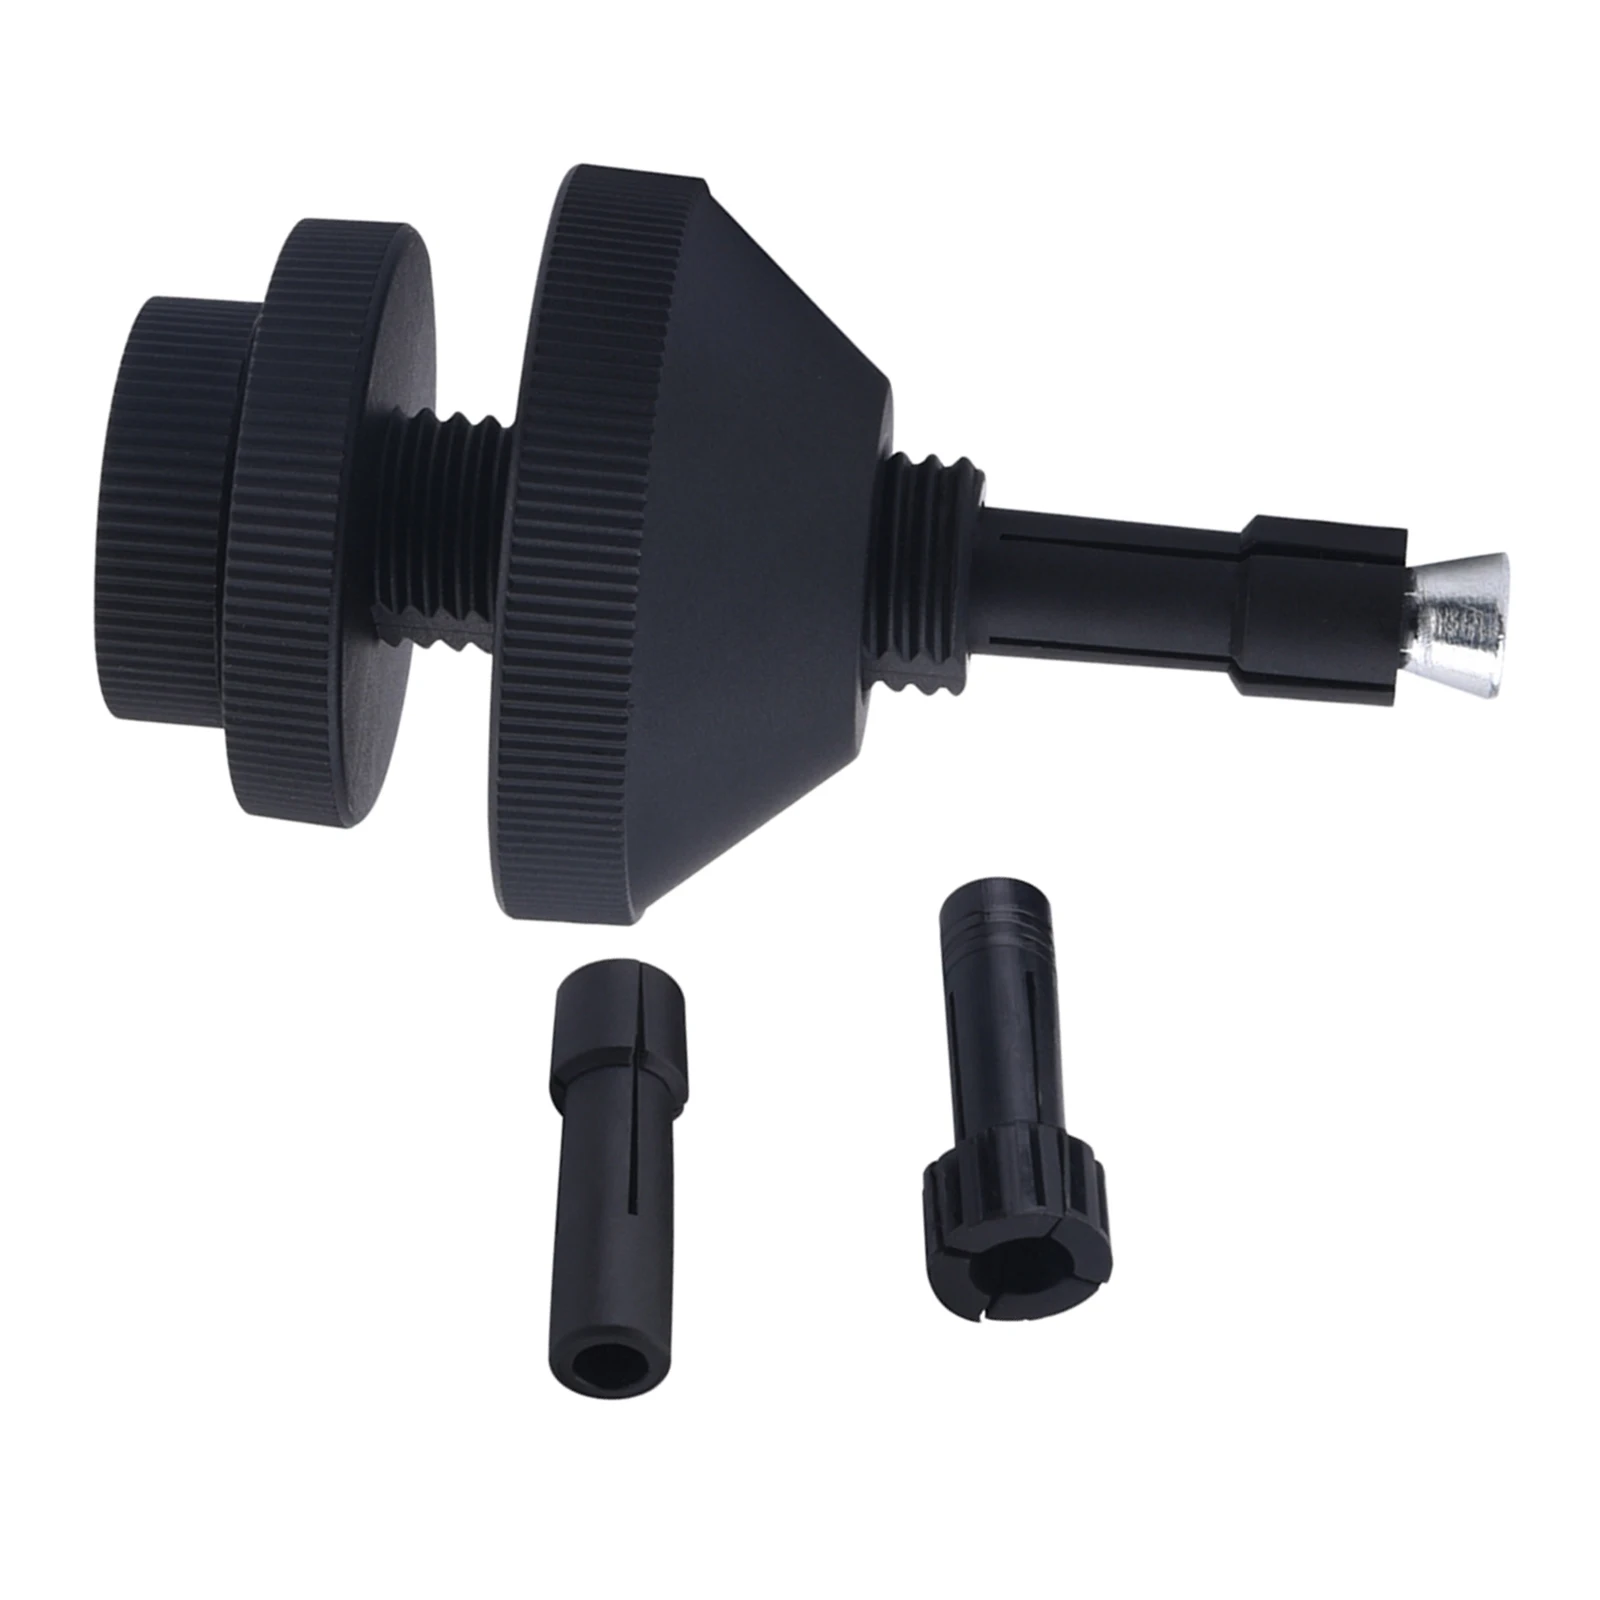 Auto Clutch Hole Corrector Clutch Alignment Centering Tool Heat Resistance Disassembly Calibration Tool Range 12.421mm